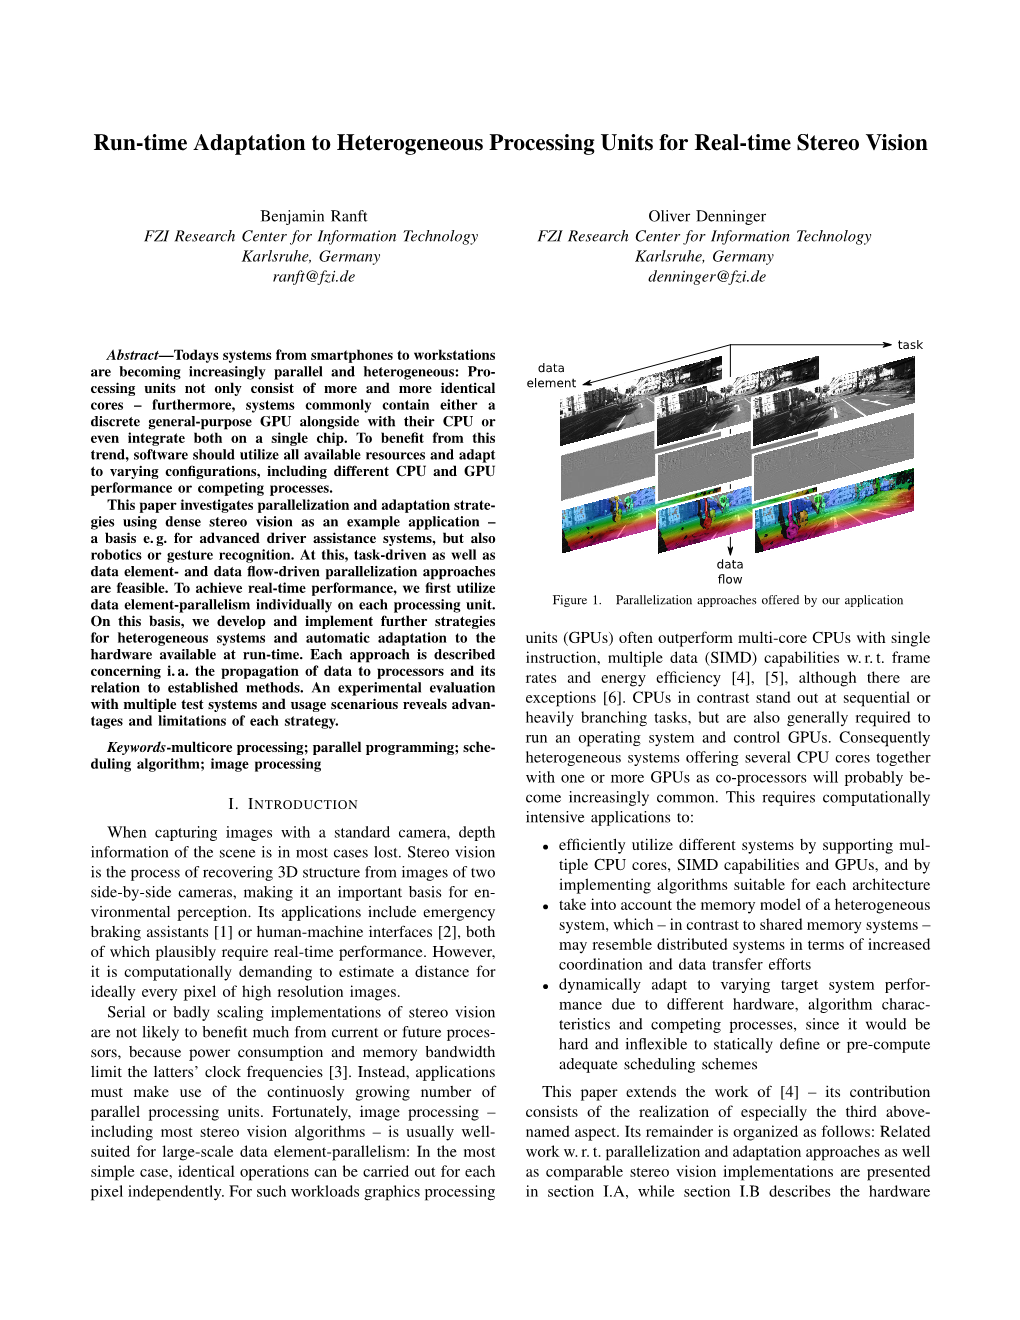 Run-Time Adaptation to Heterogeneous Processing Units for Real-Time Stereo Vision